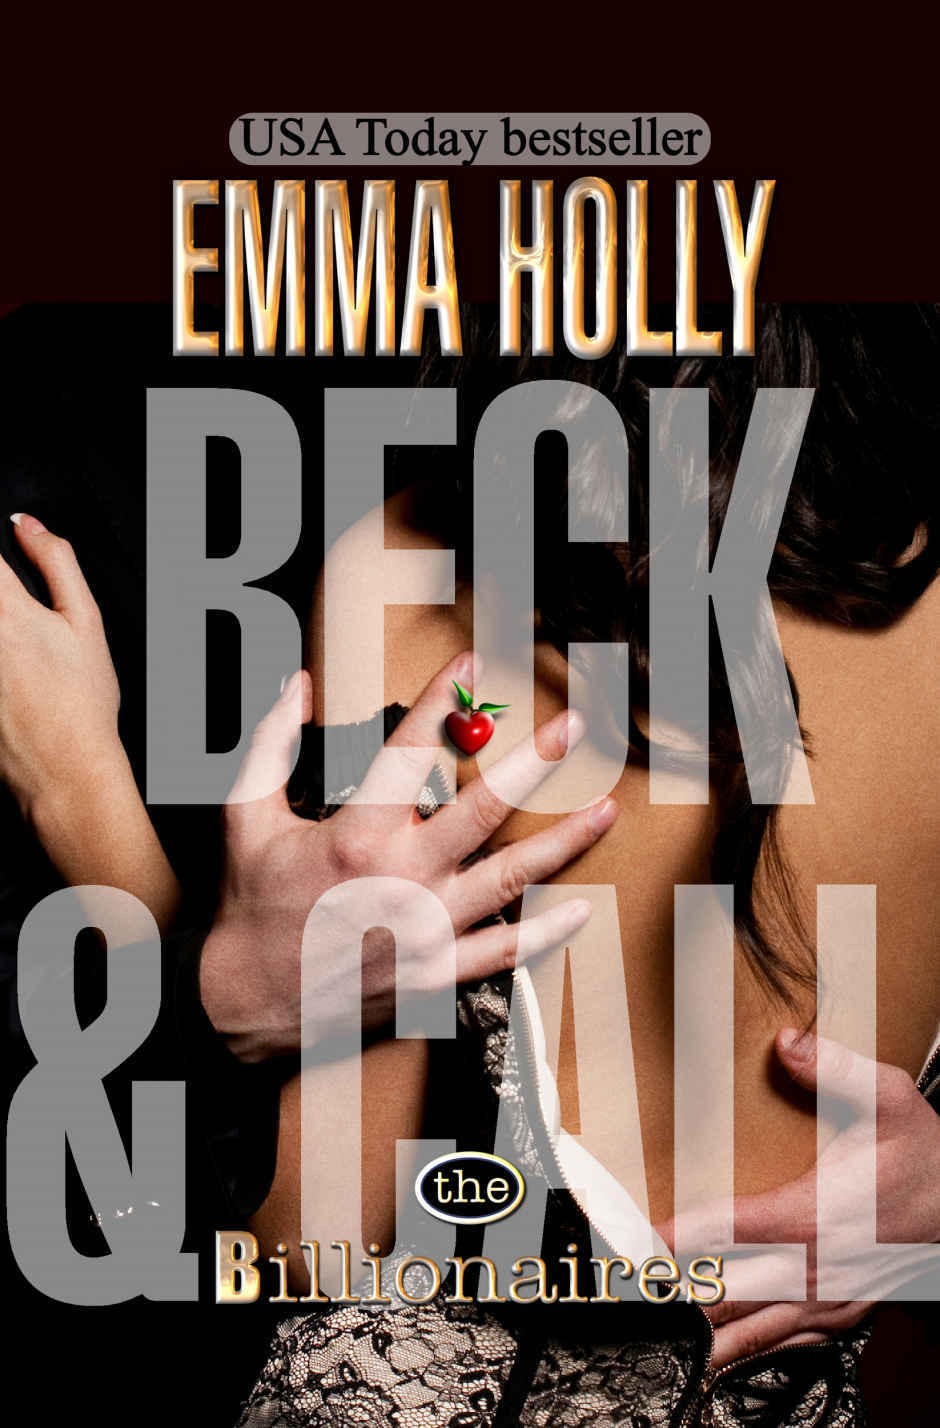 Beck & Call by Emma Holly